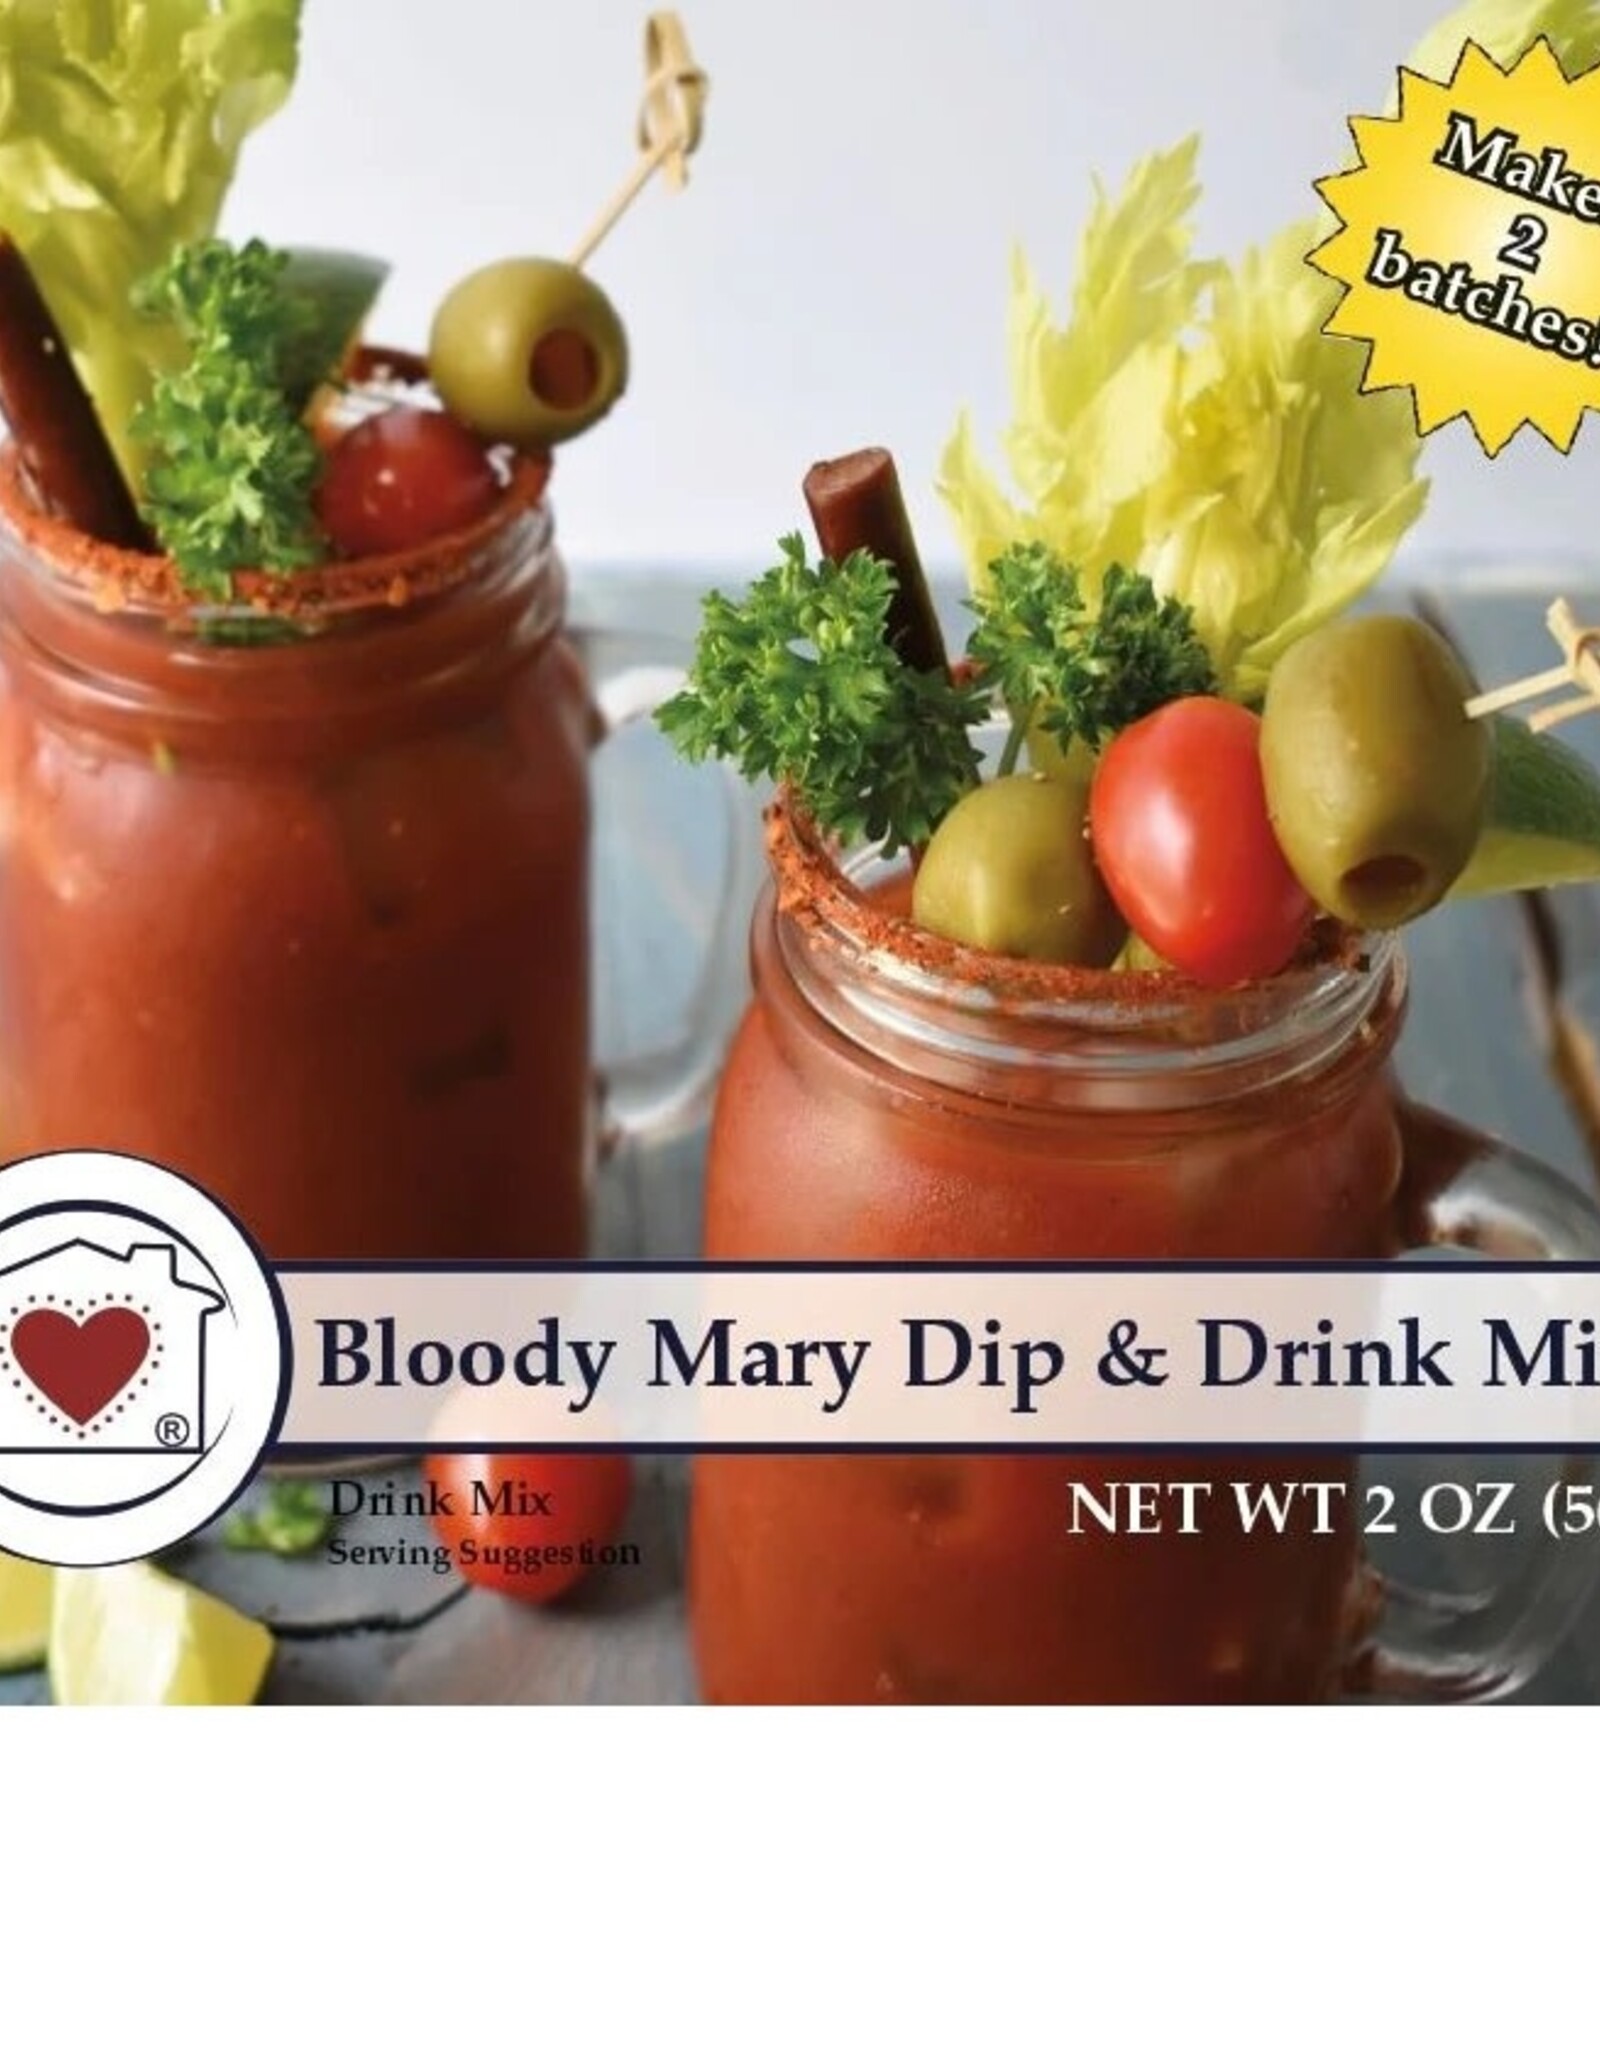 Country Home Creations BLOODY MARY DIP & DRINK MIX - makes 2 batches